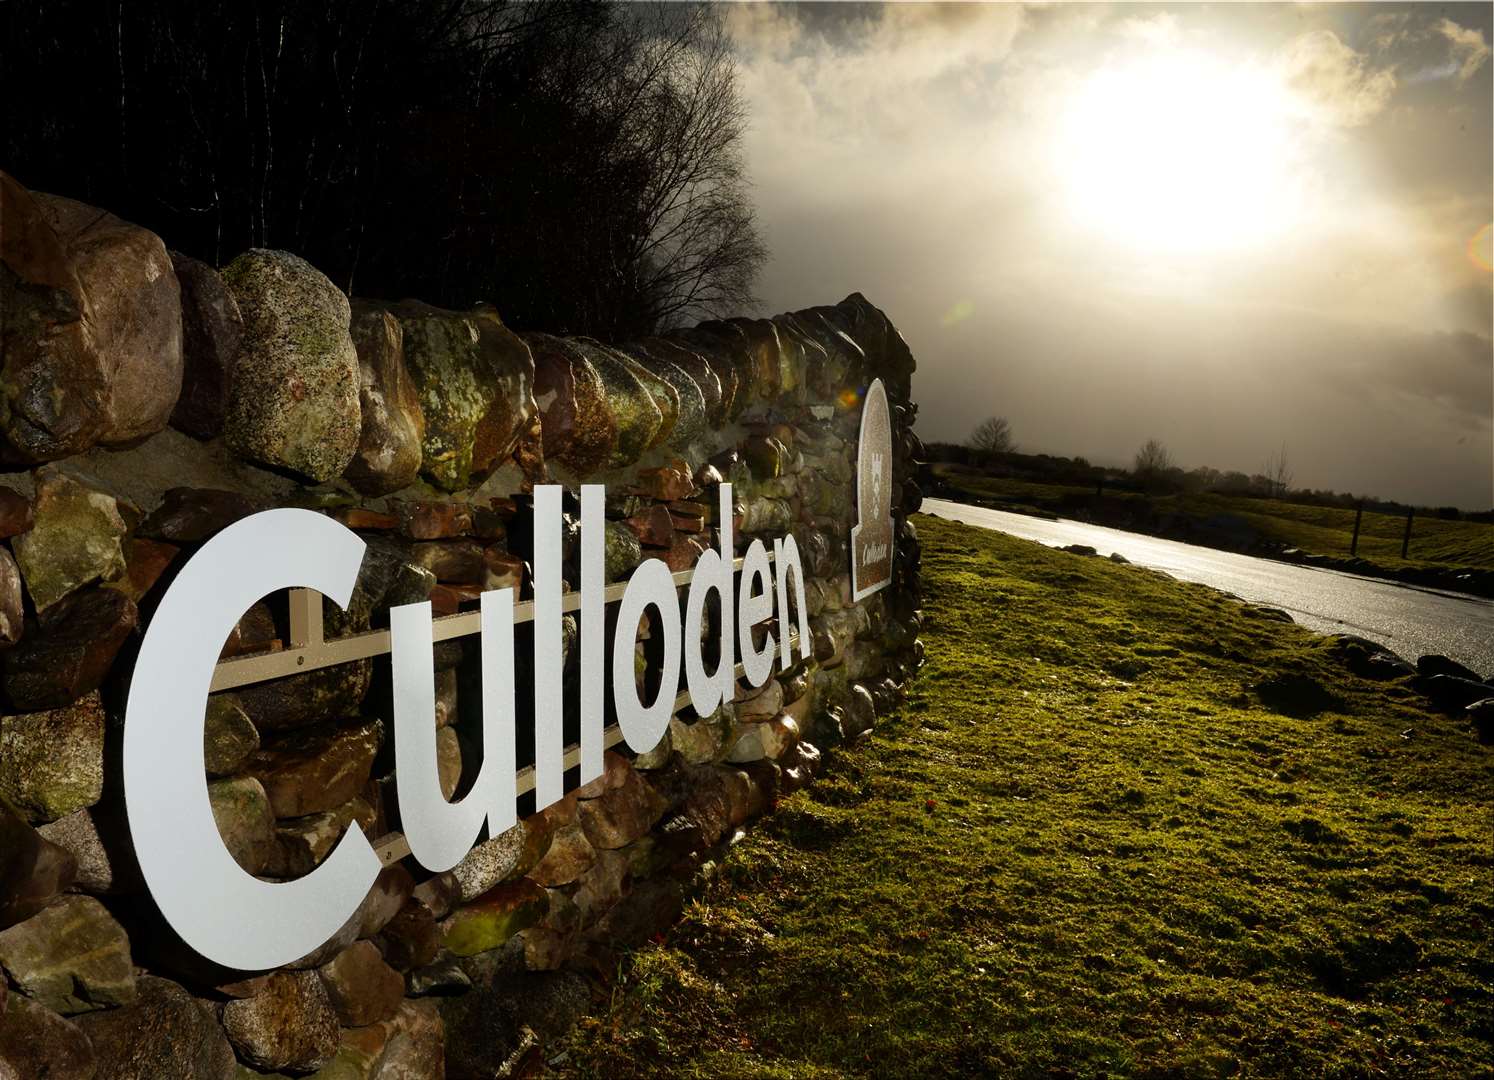 Developers and protesters have clashed over proposals for a holiday development at Culloden.